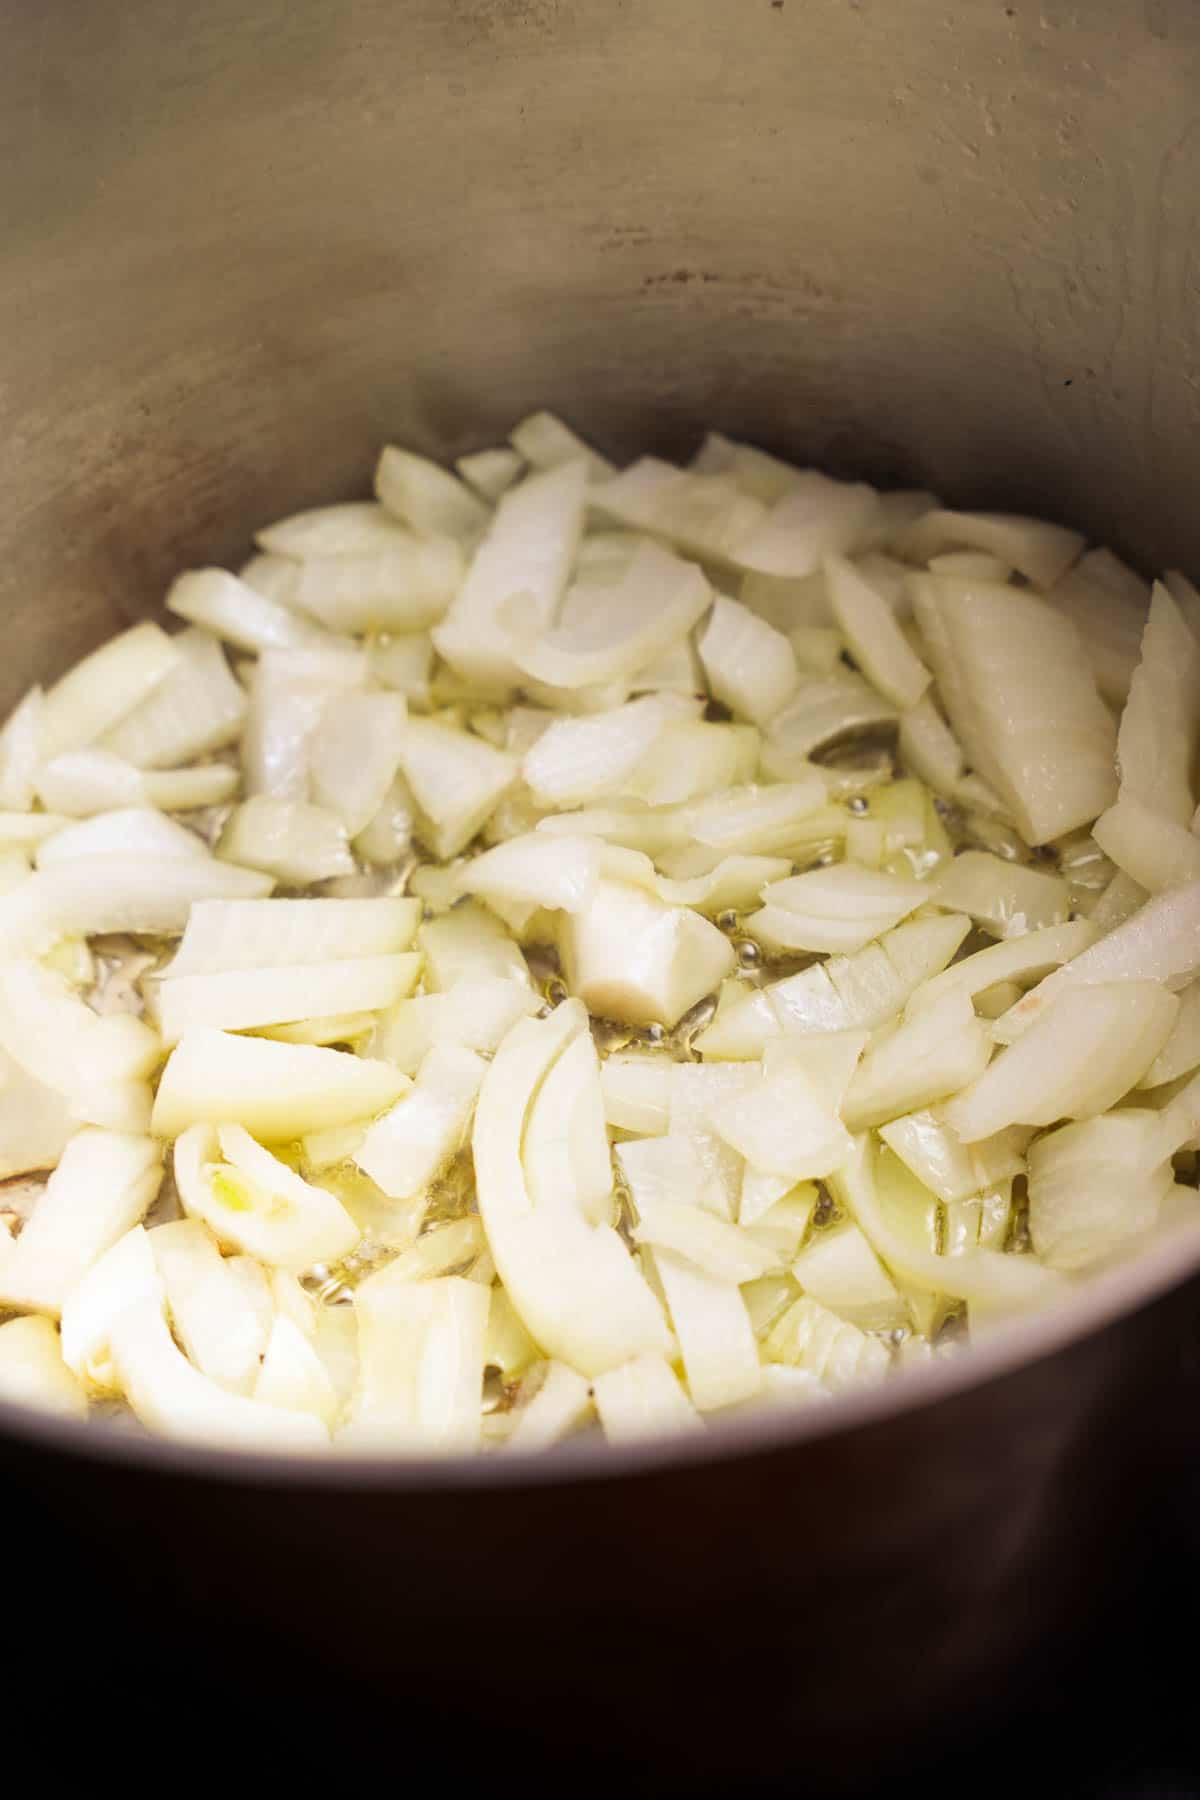 Diced onions sauté in hot oil in a stainless steel pot.